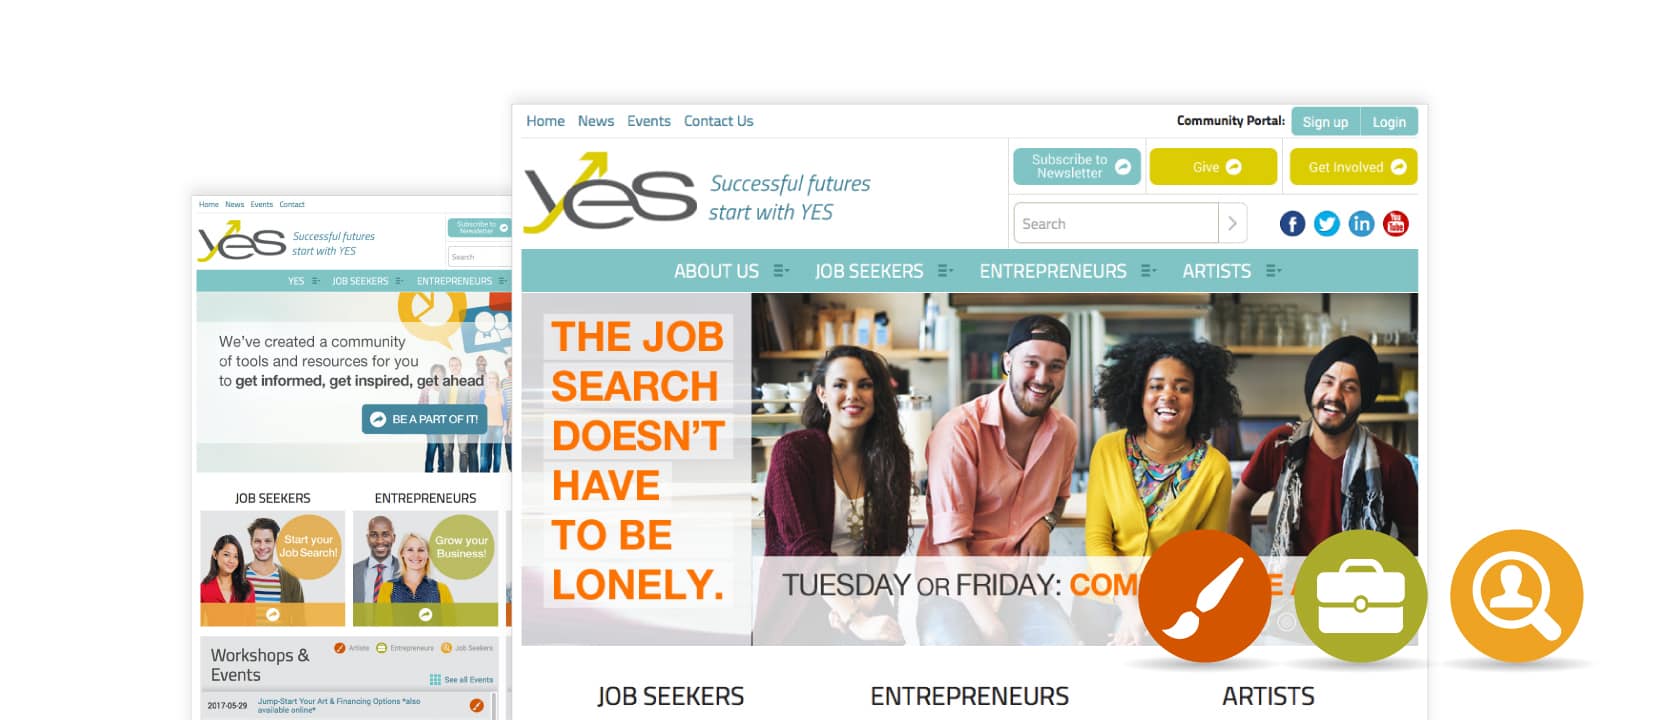 Screenshots of the YES homepage